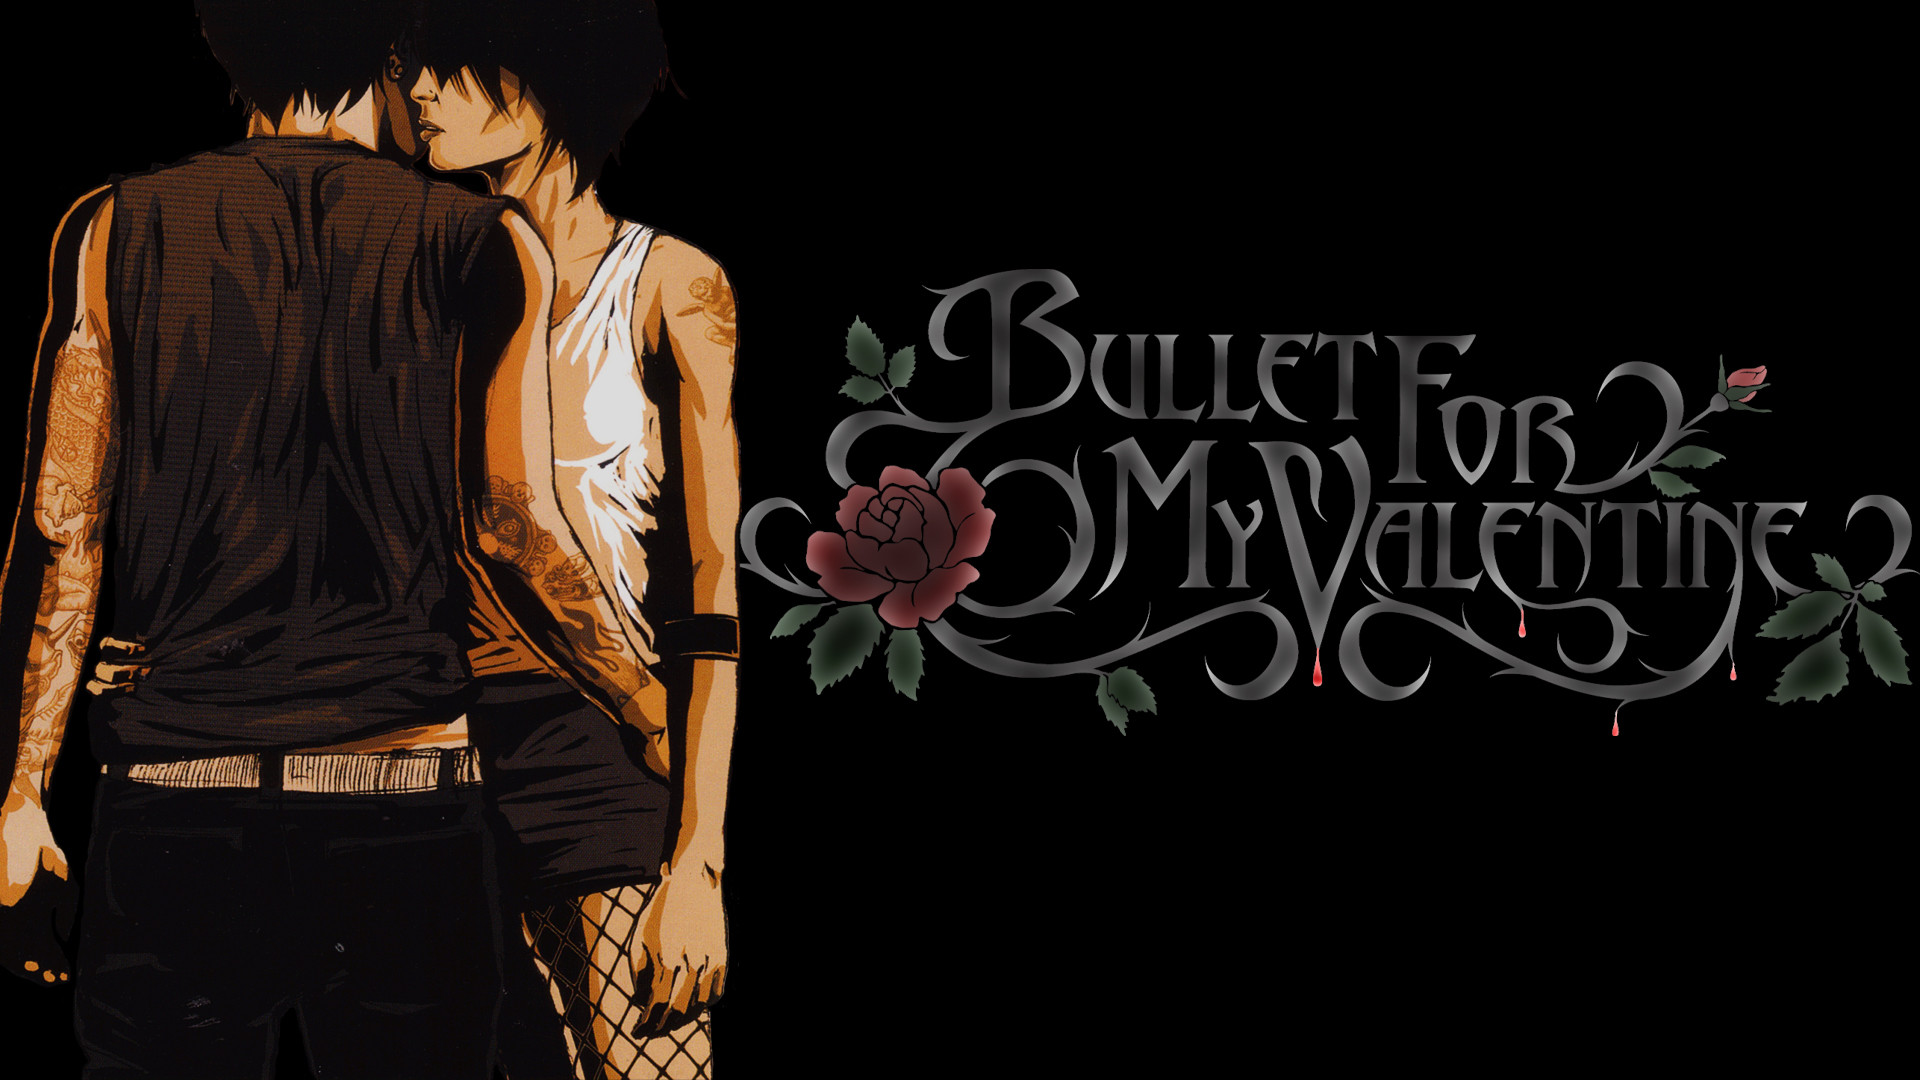 1920x1080 Bullet For My Valentine by JulianGreen1 Bullet For My Valentine by  JulianGreen1